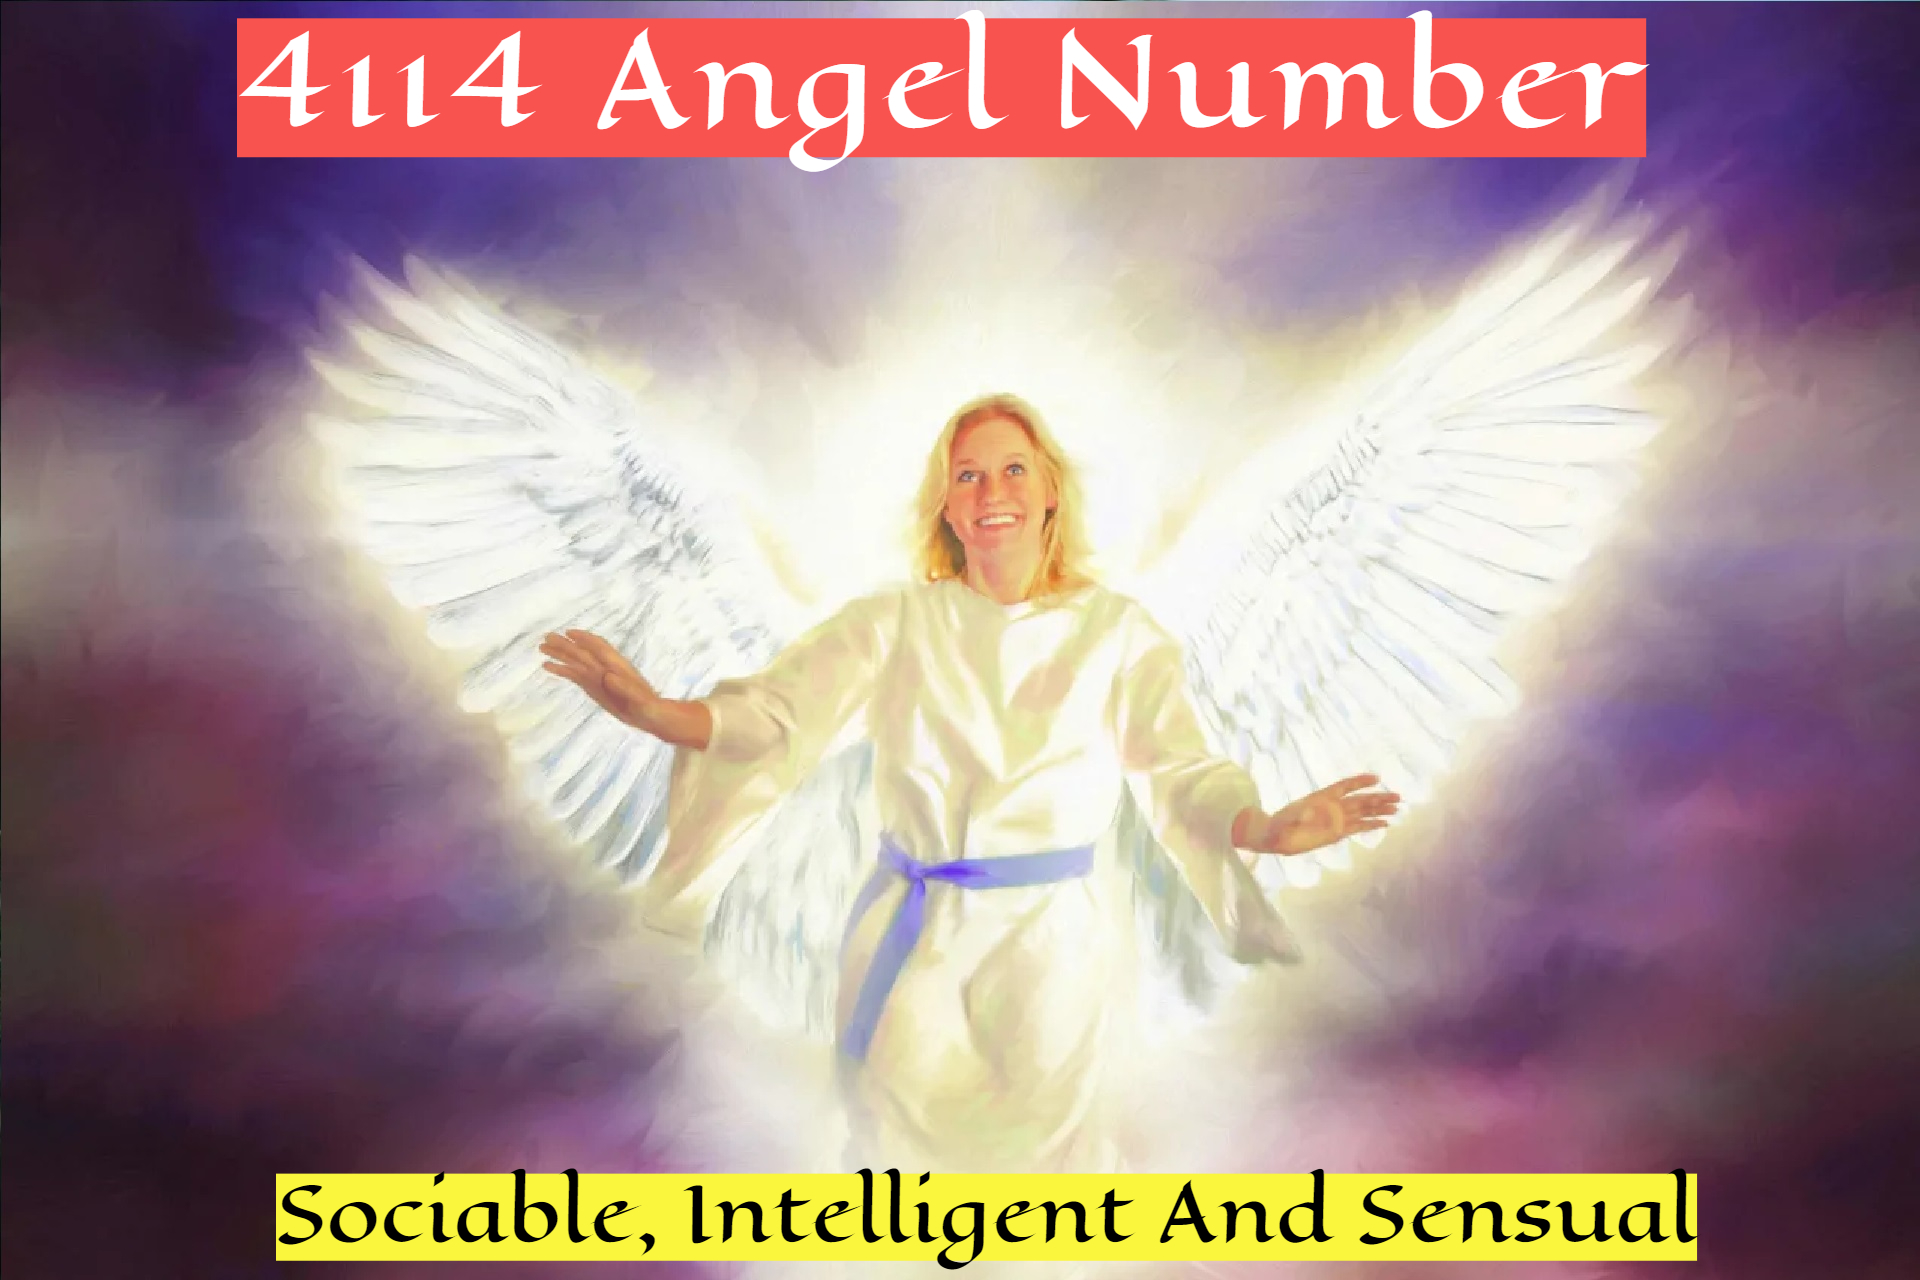 4114 Angel Number - Close Attention To Your Intuitions